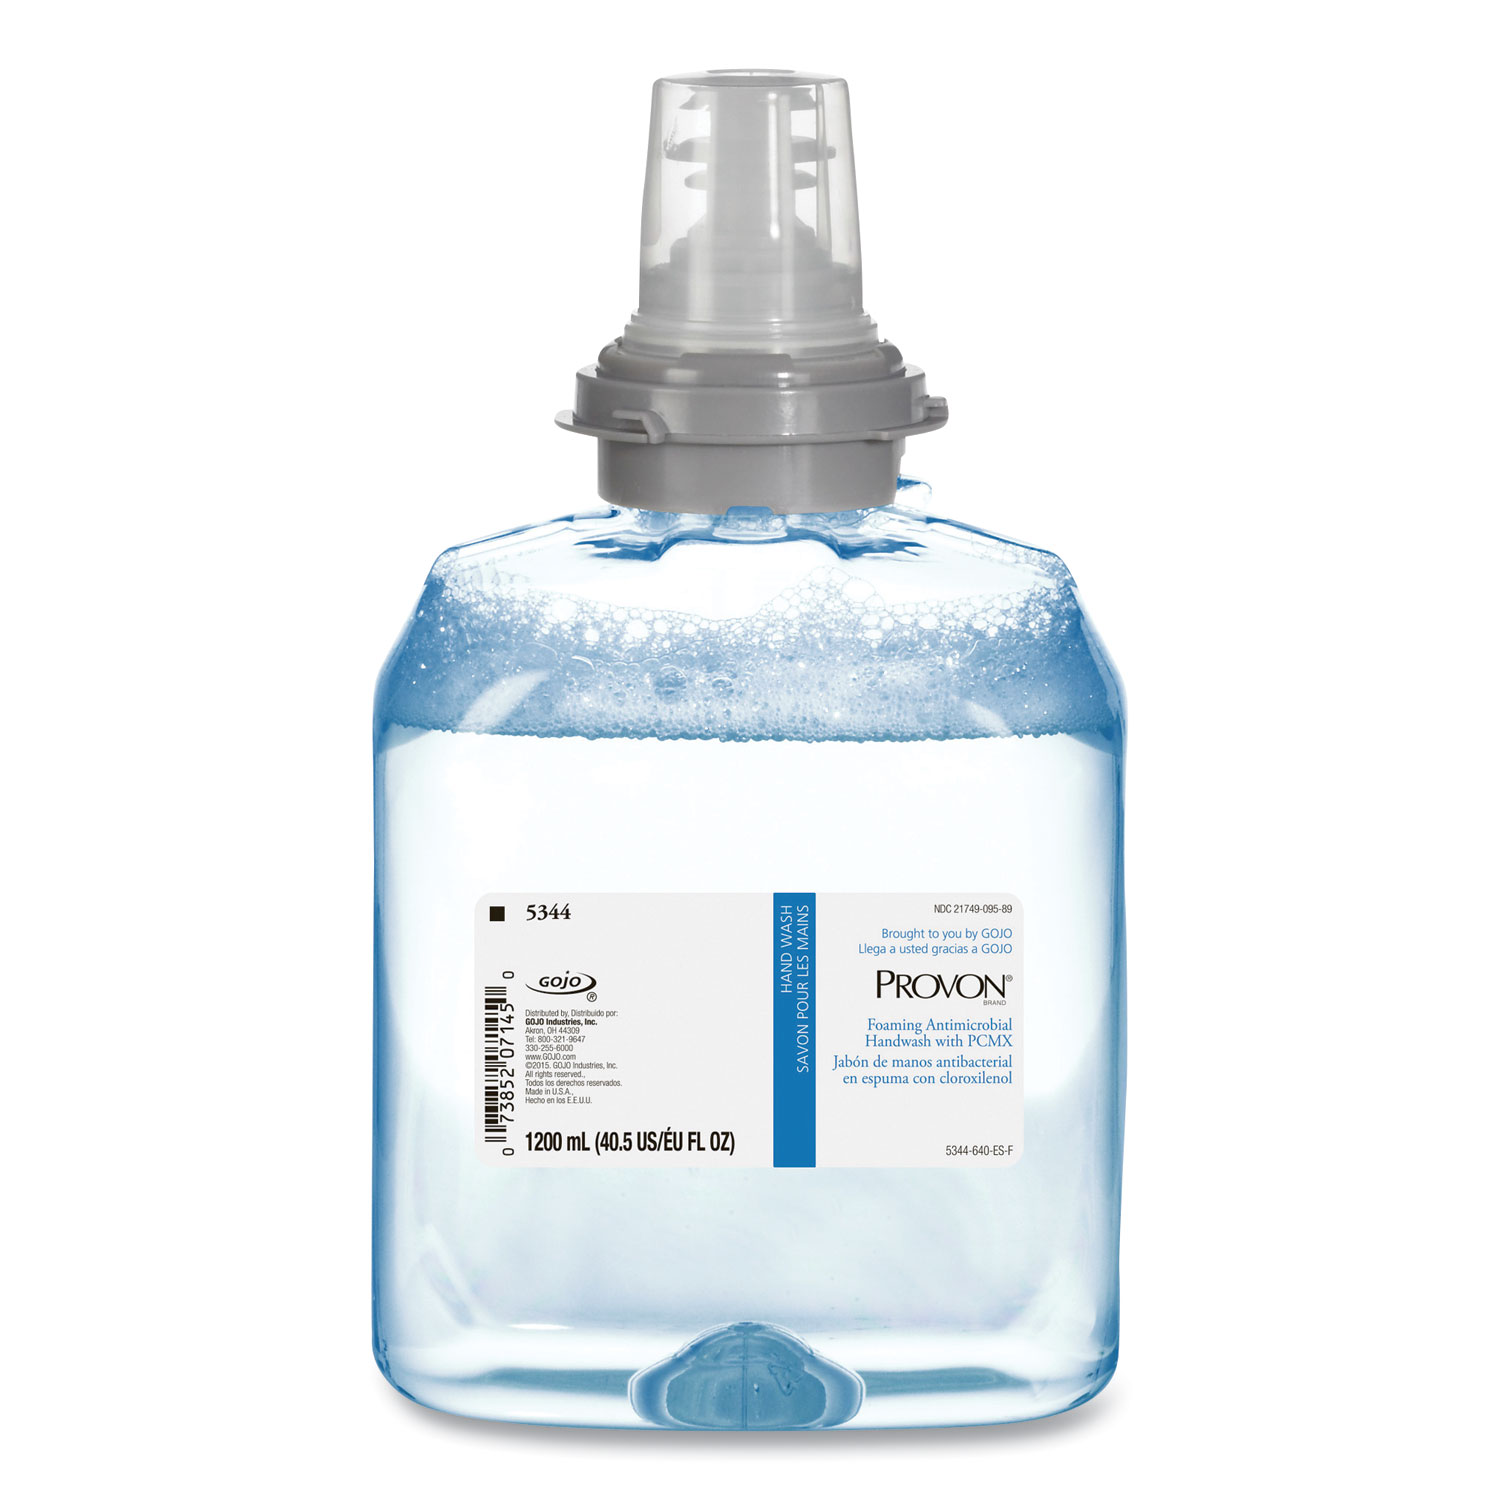  PROVON 5344-02 Foaming Antimicrobial Handwash with PCMX, Floral, 1,200 mL Refill, For TFX, 2/Carton (GOJ534402CT) 